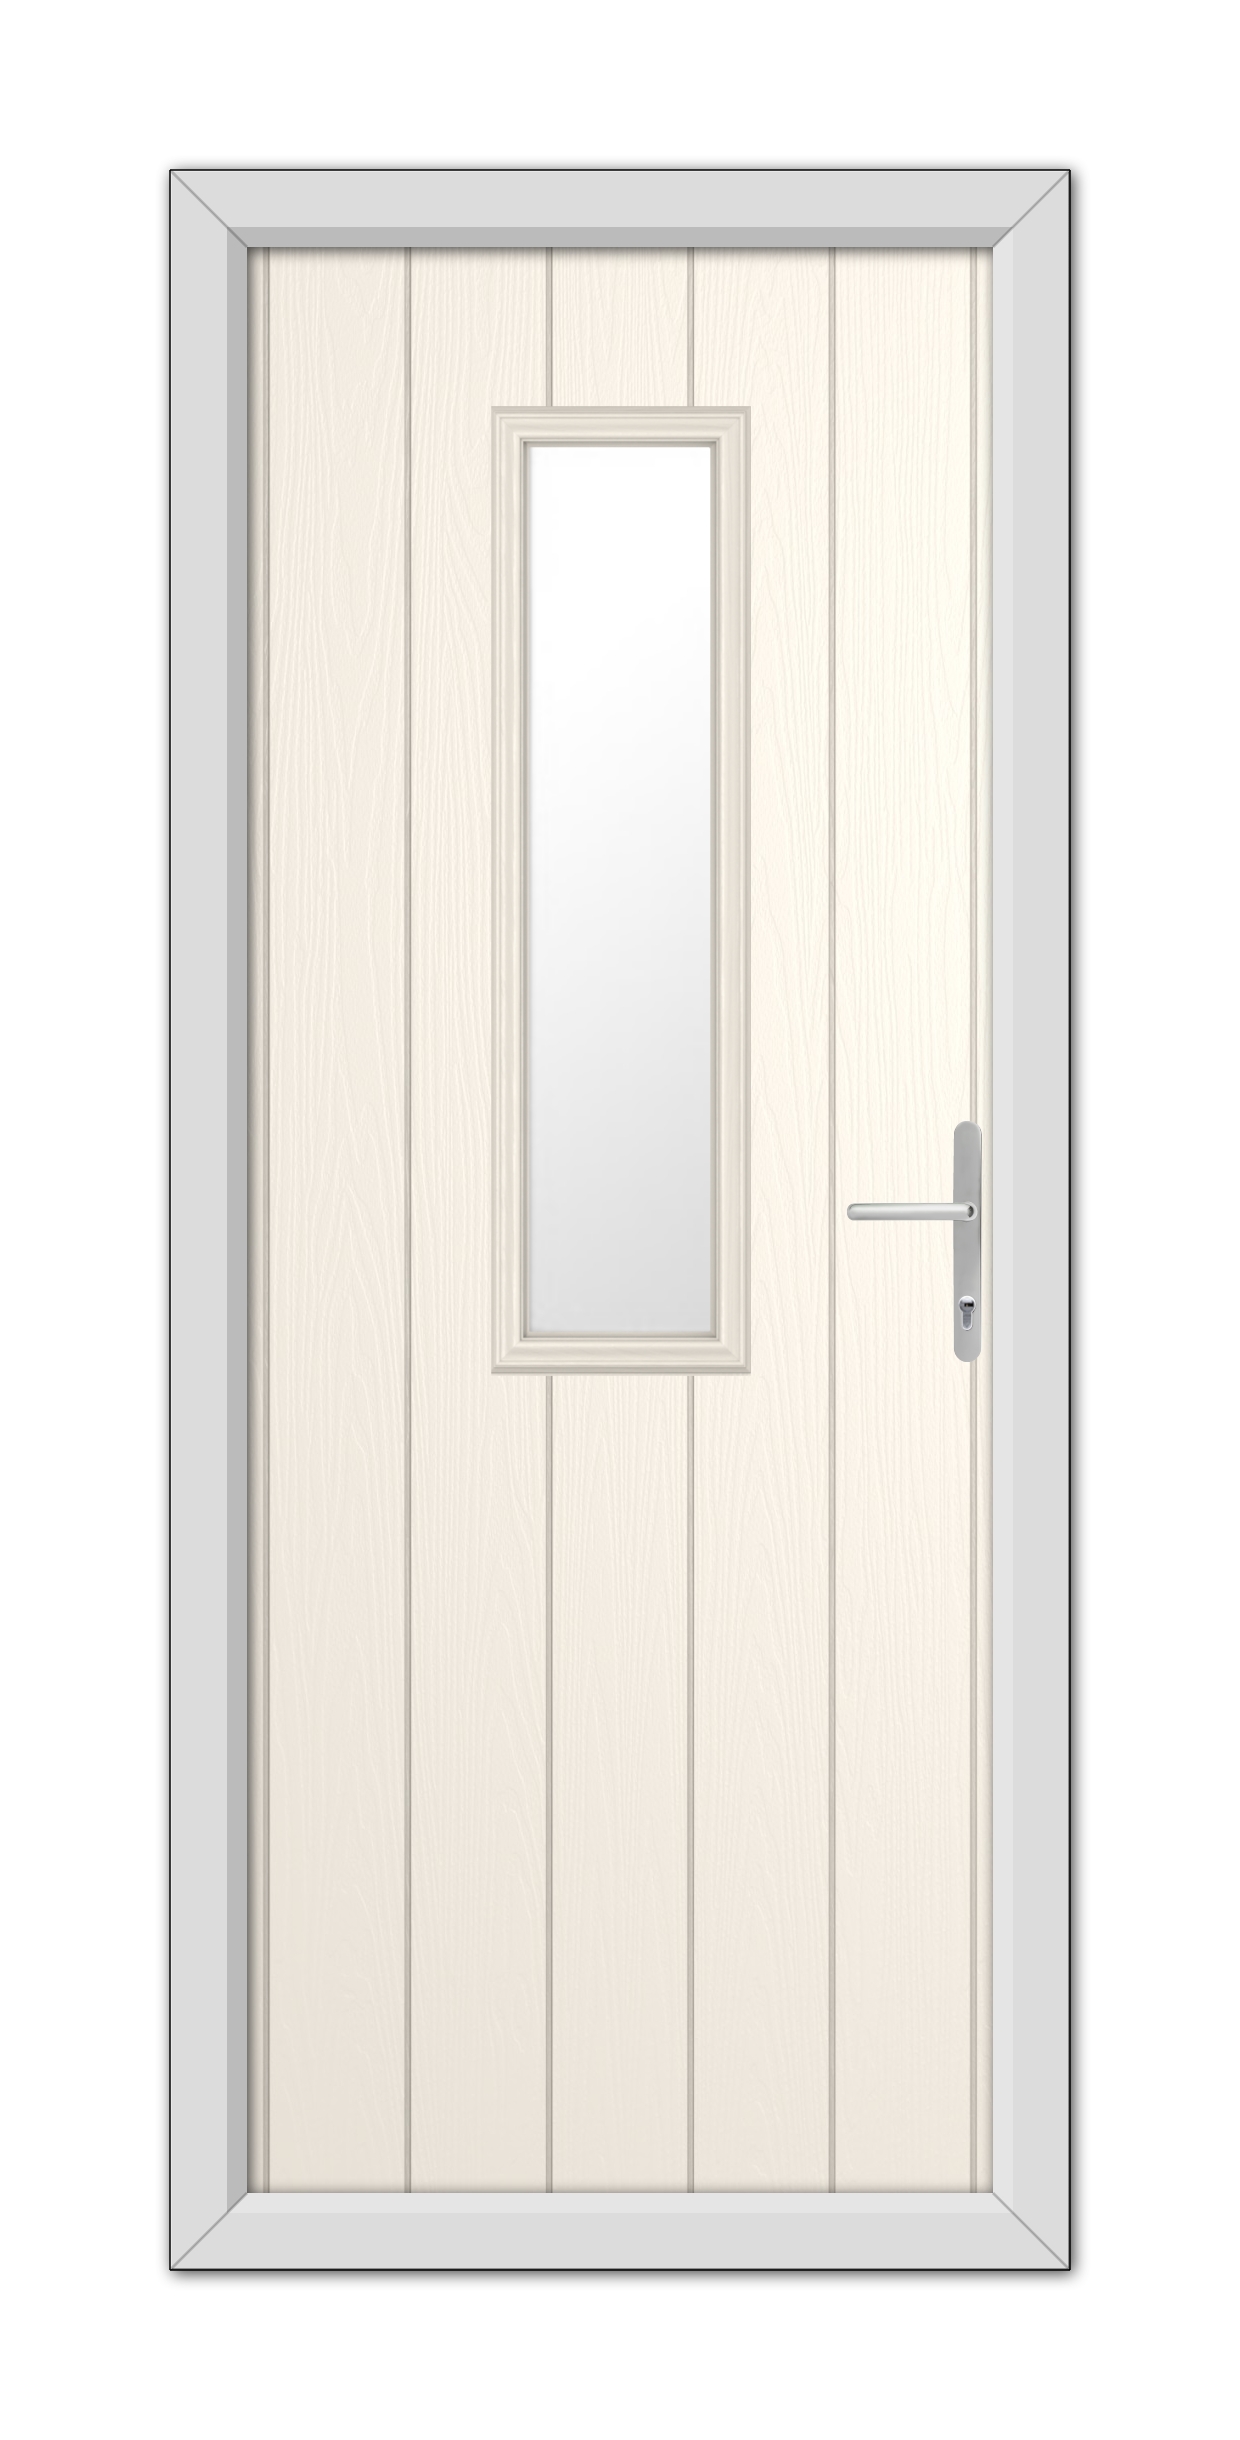 A White Foil Mowbray Composite Door 48mm Timber Core with a vertical glass panel, metal handle, and frame, isolated on a white background.